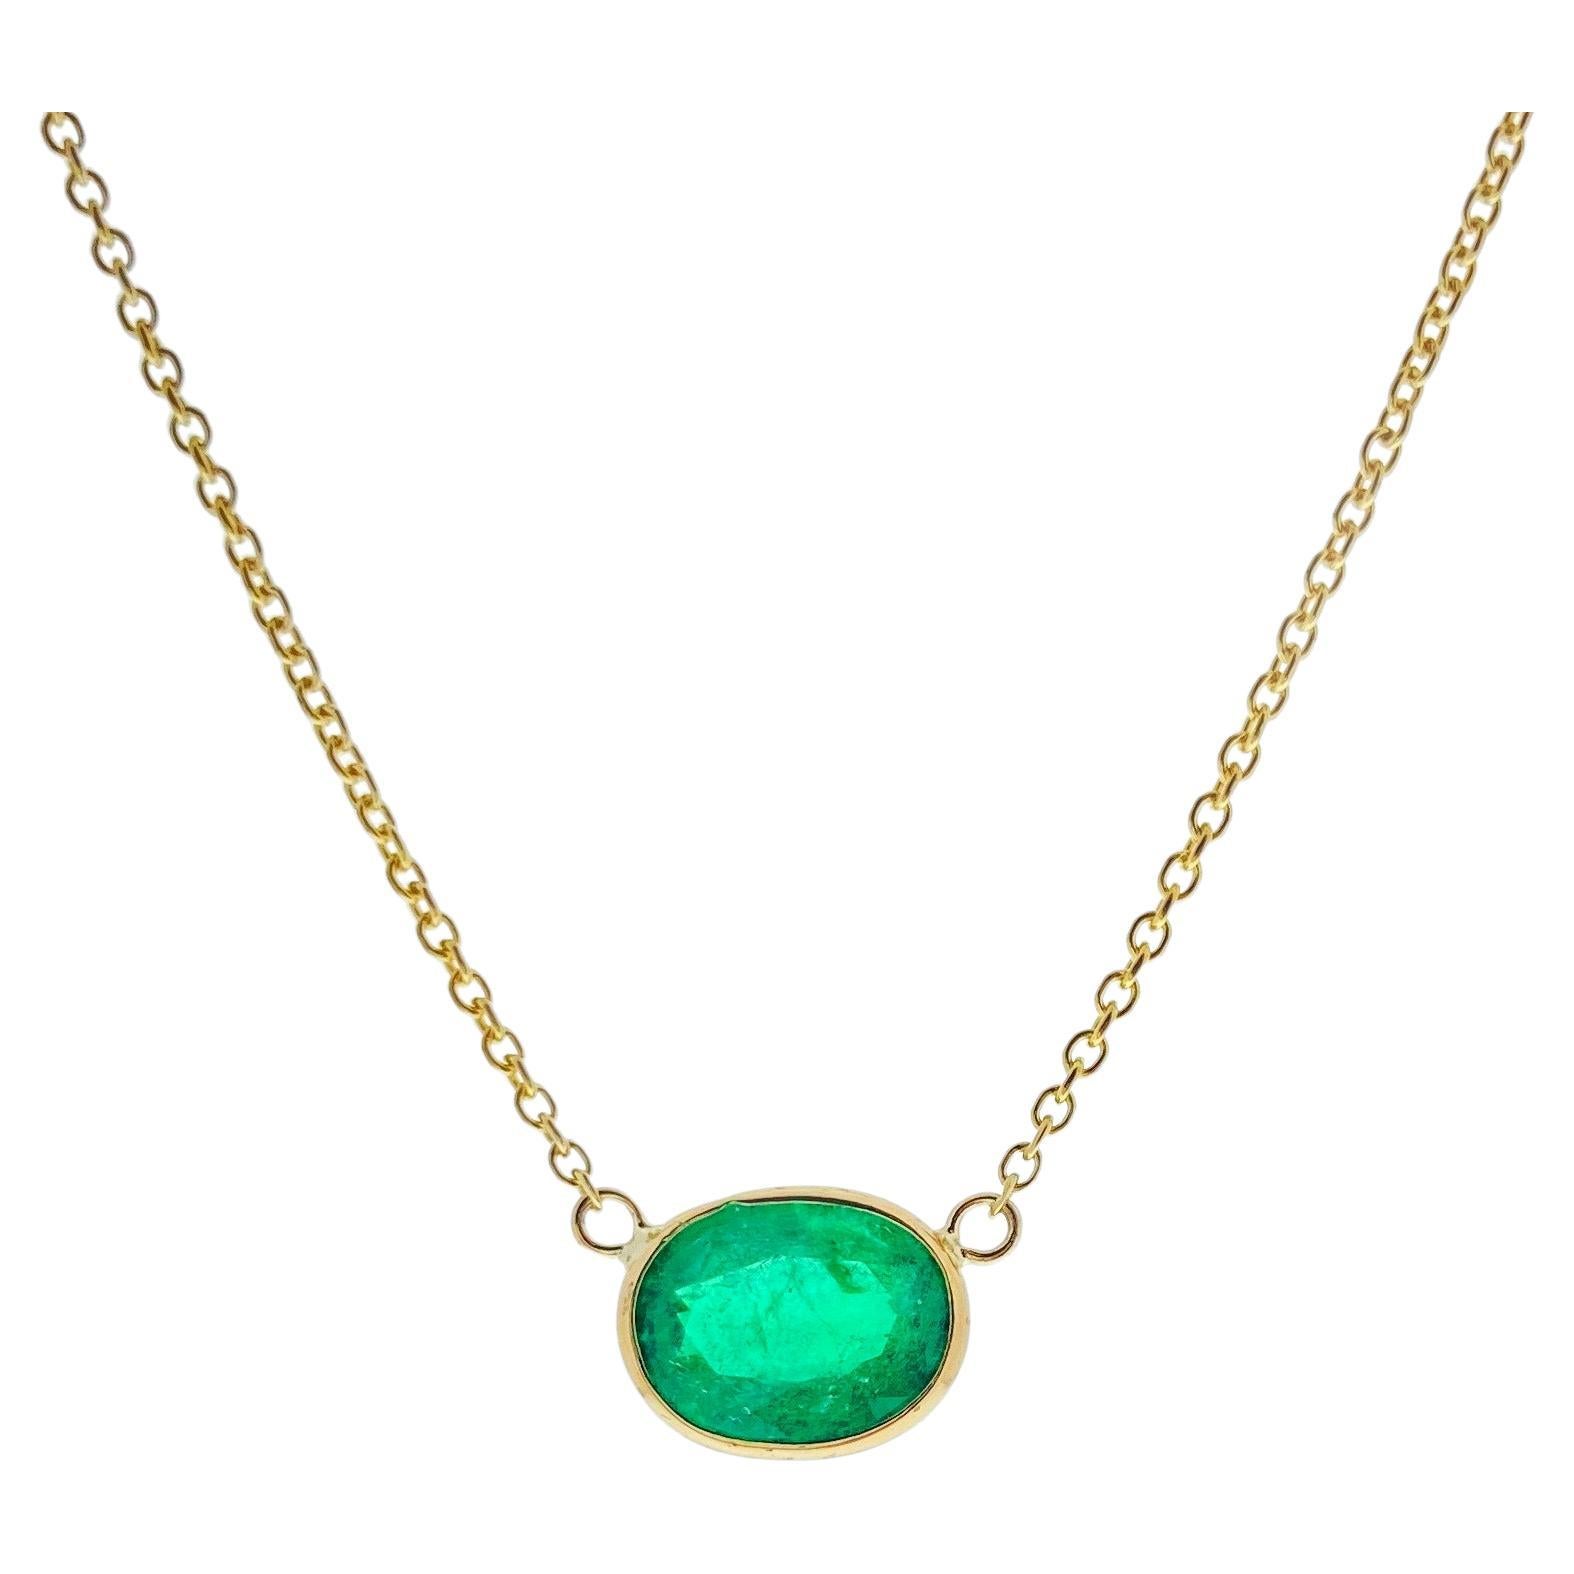 1.44 Carat Green Emerald Oval Cut Fashion Necklaces In 14K Yellow Gold